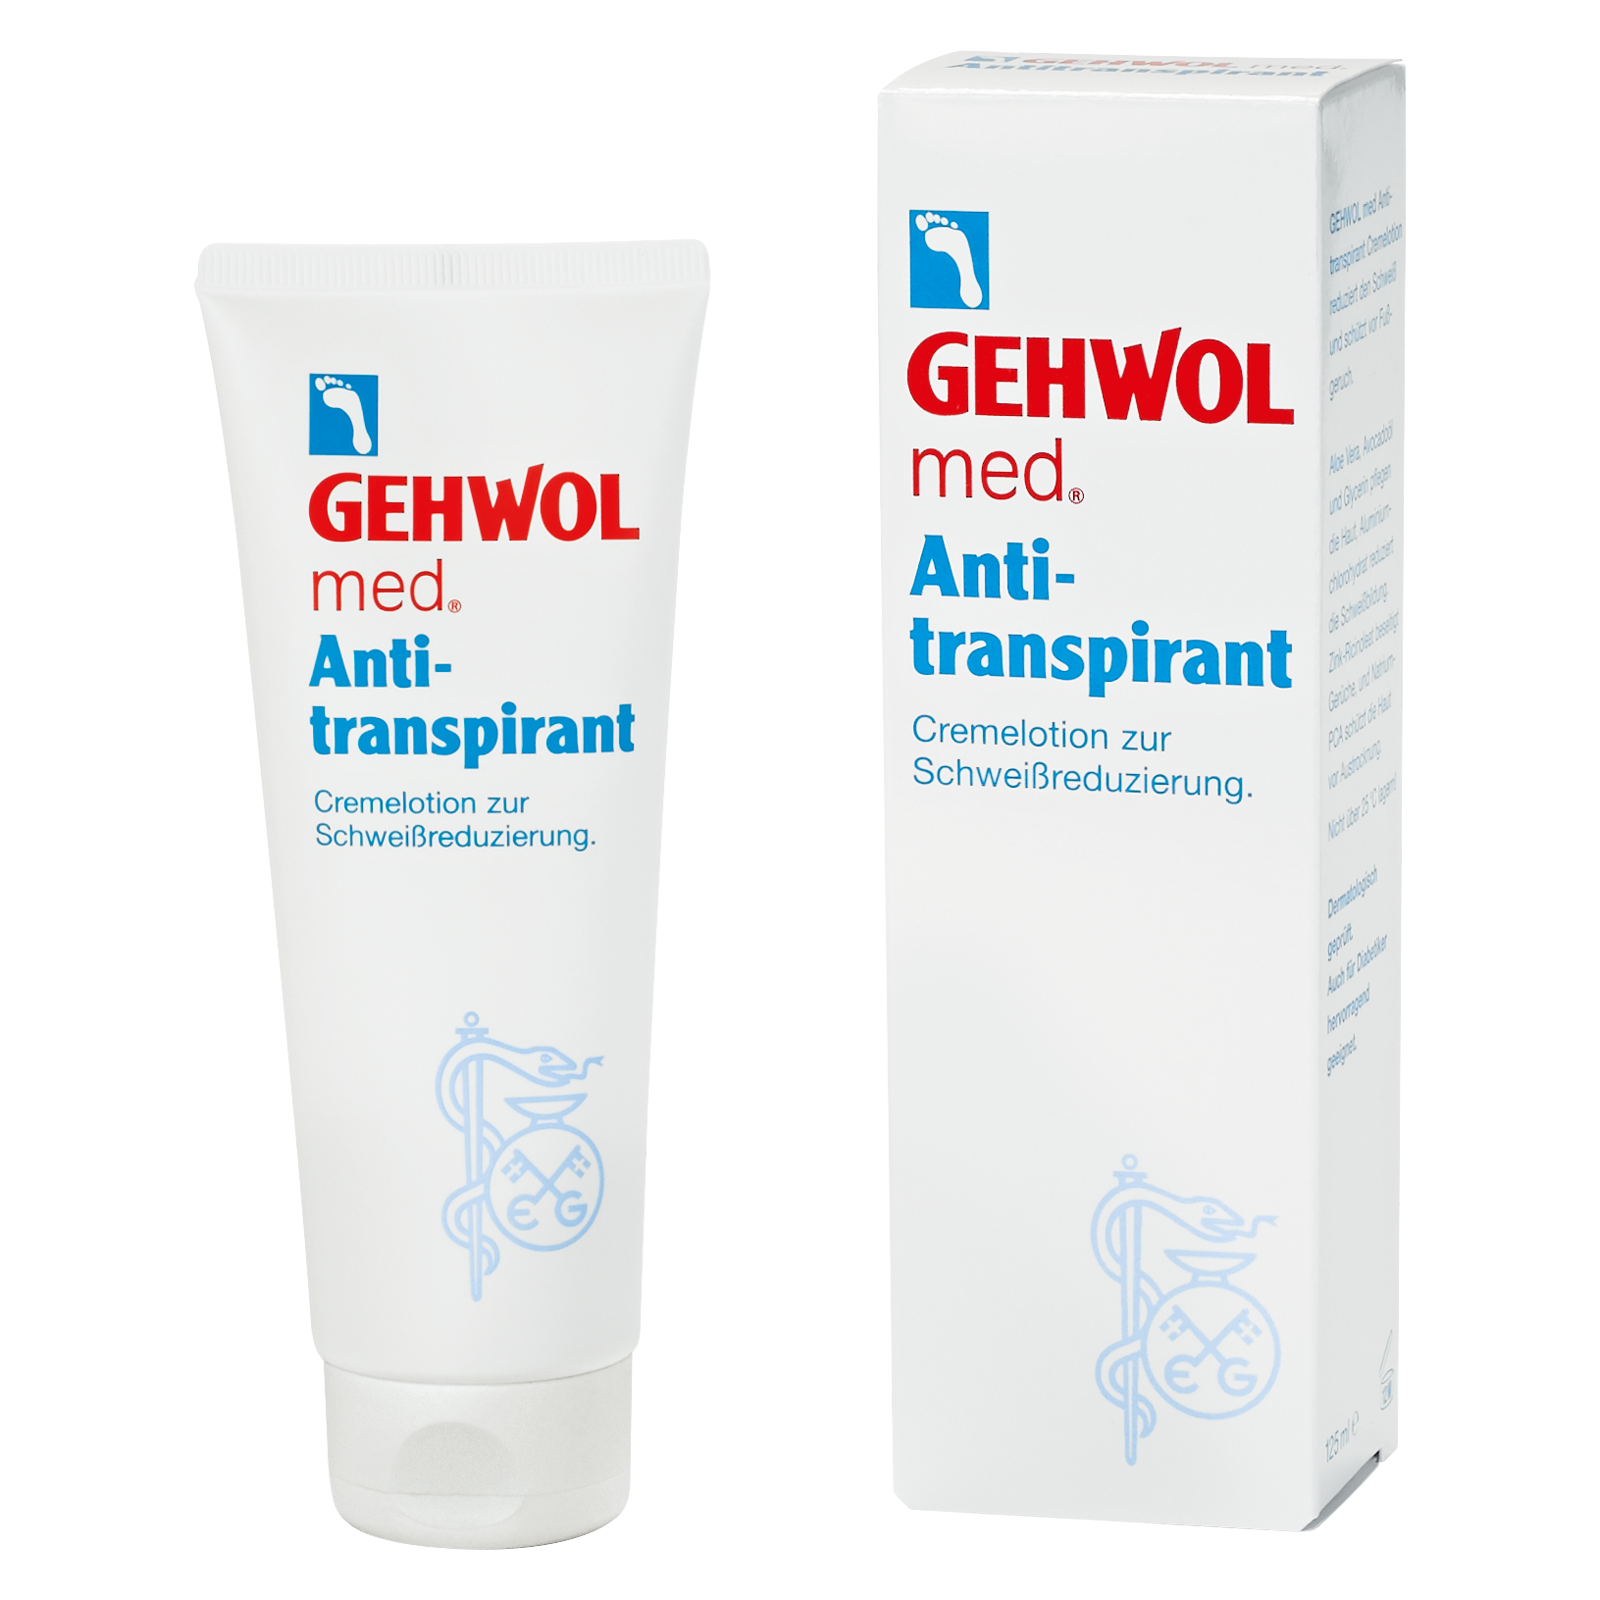 GEHWOL med Antiperspirant 125 ml tube - Foot care products for foot enthusiasts